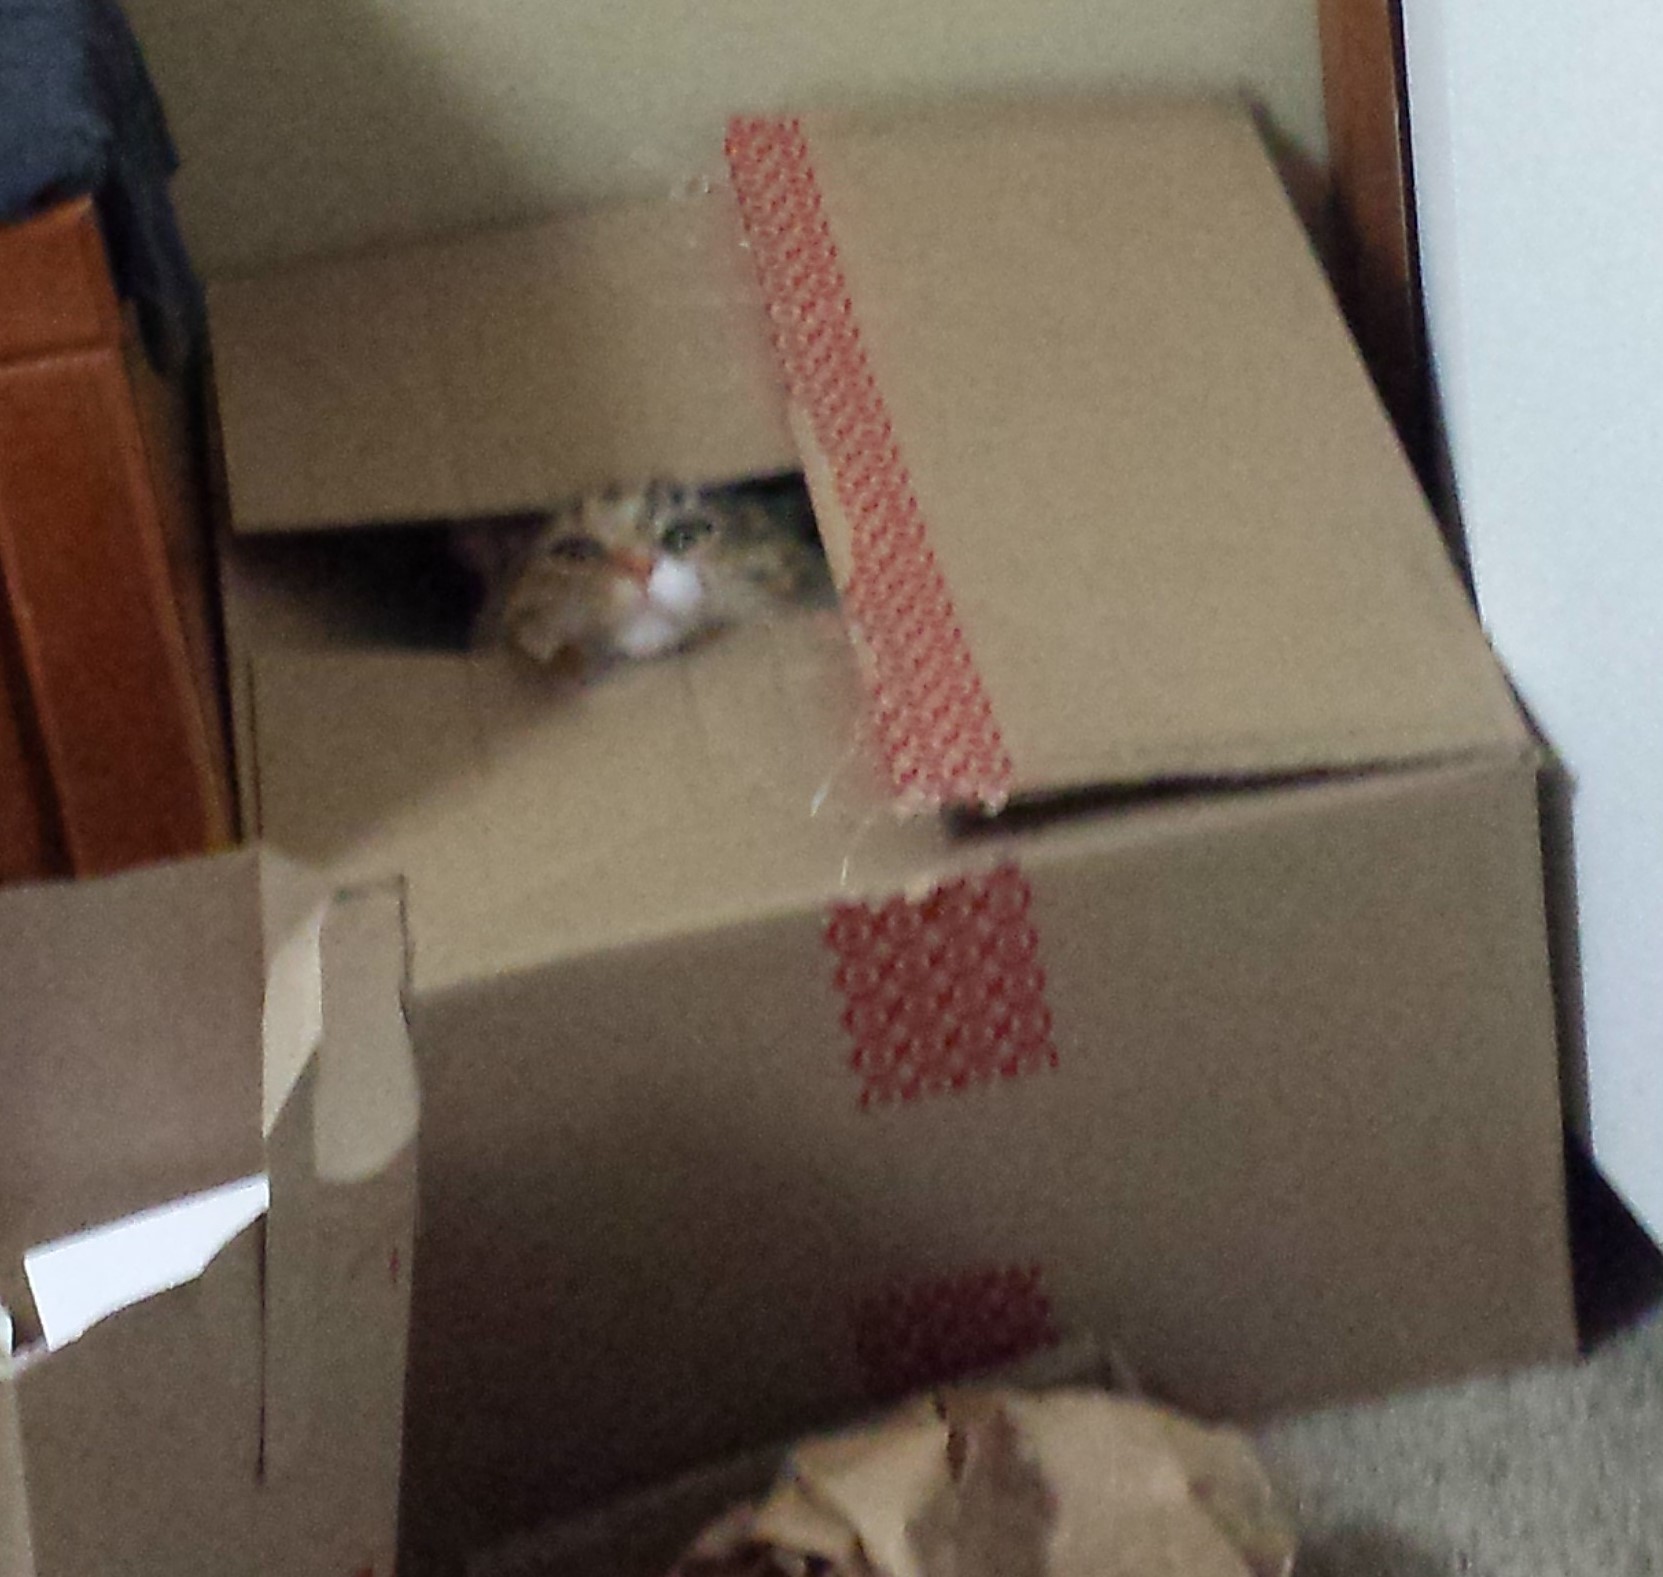 Tally sticking her face out of a box